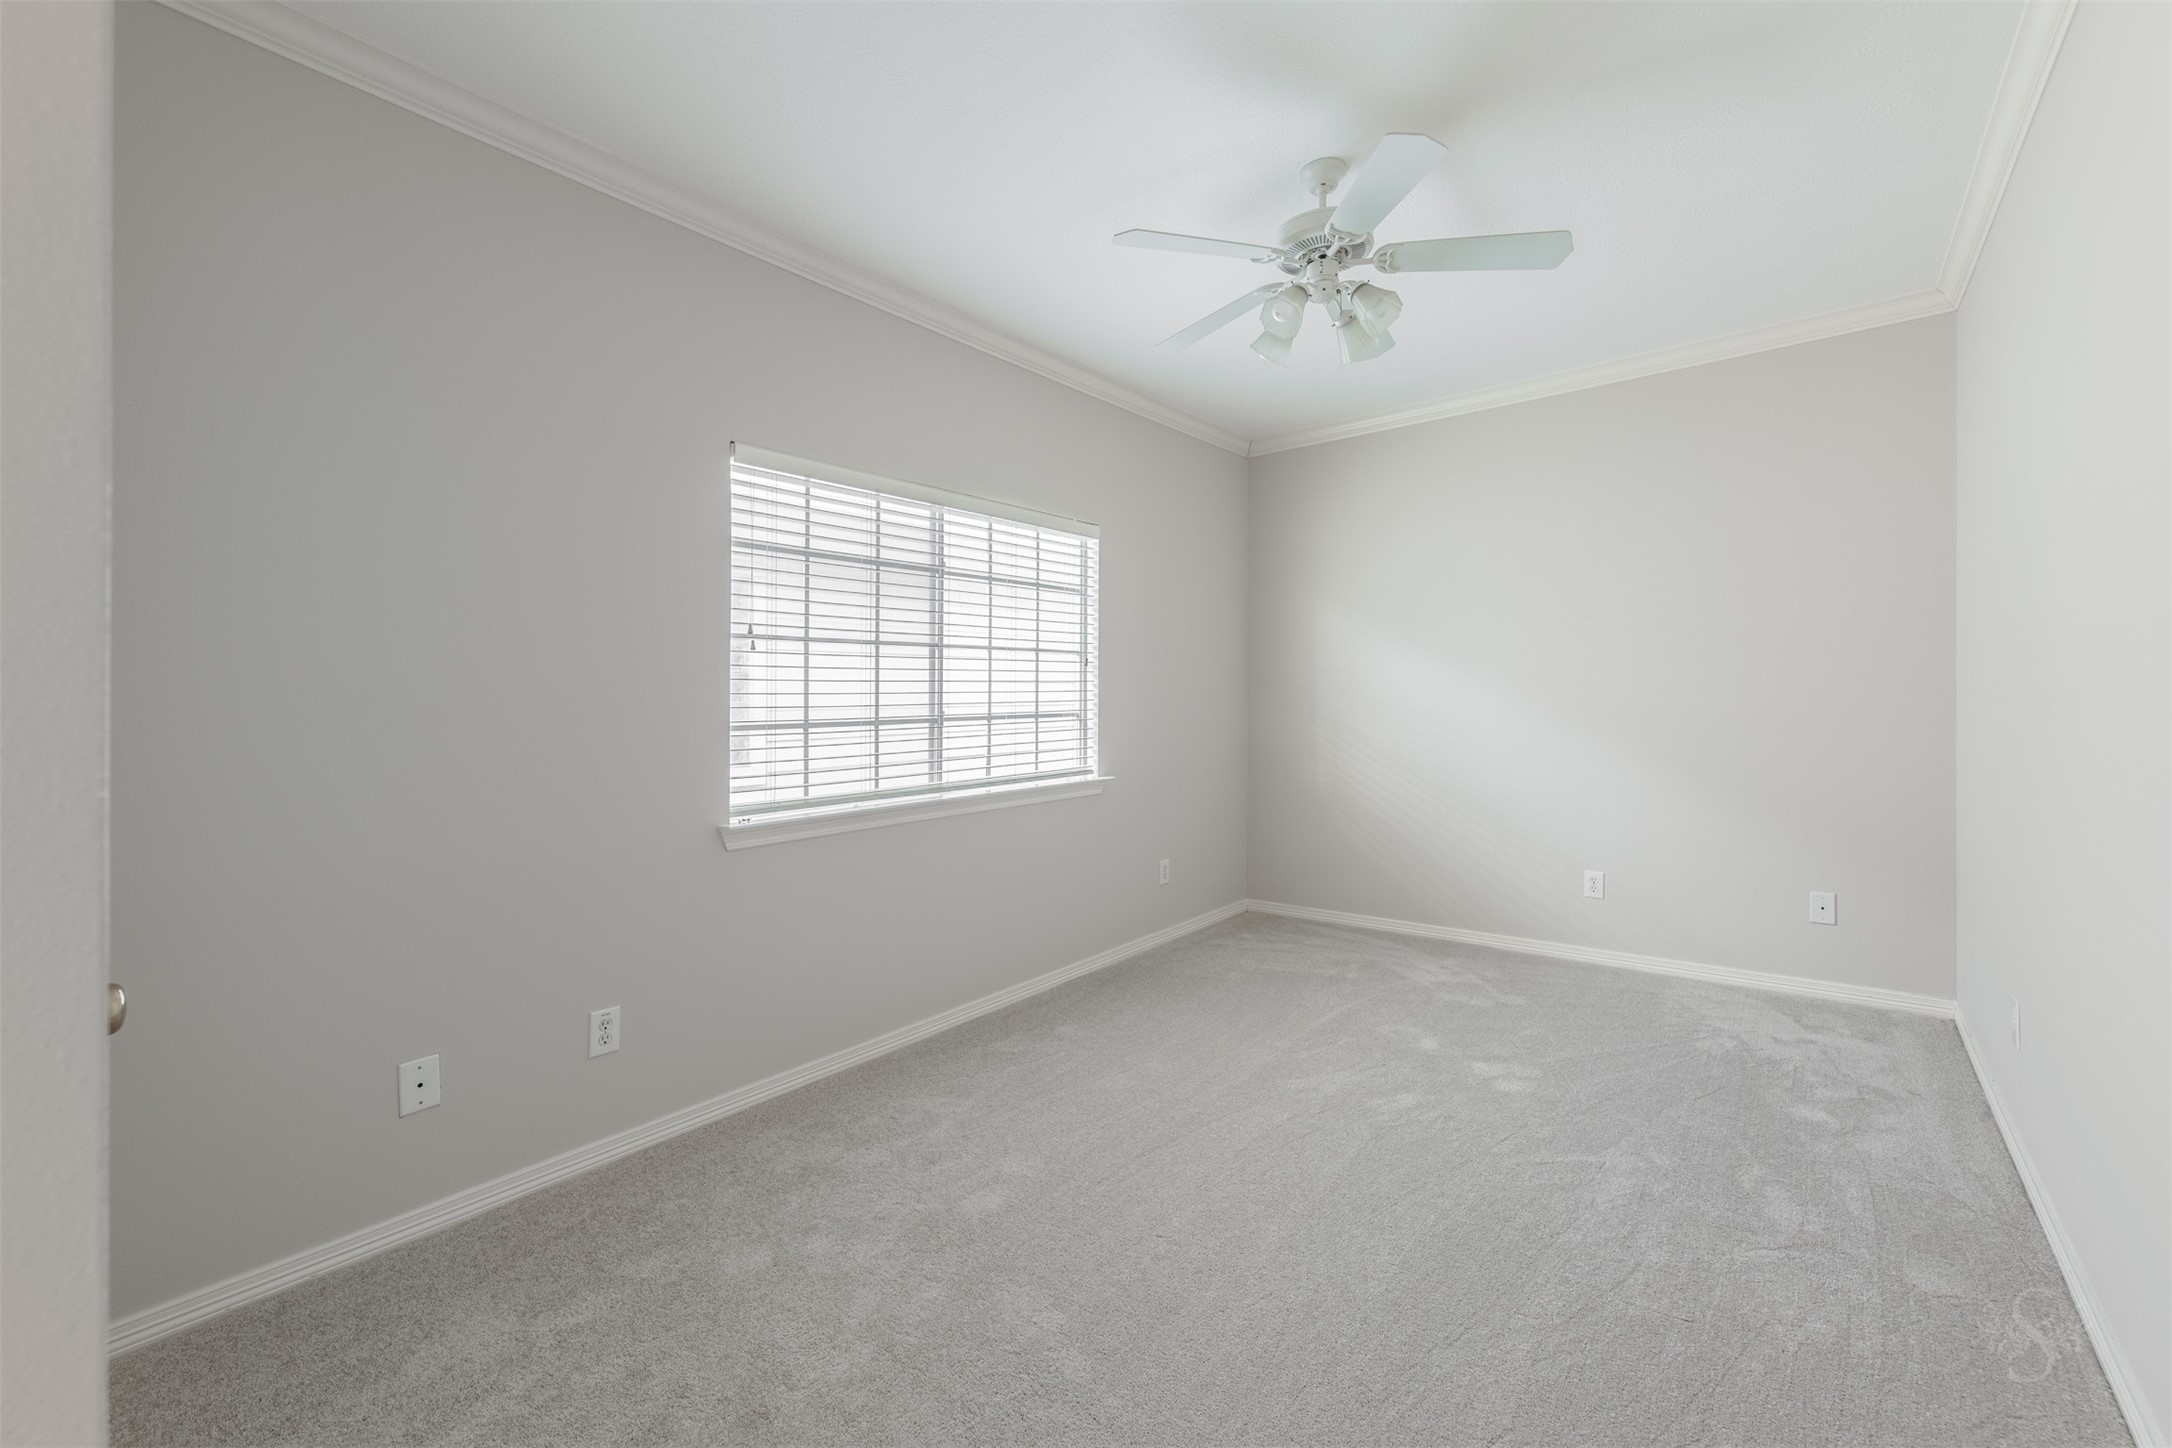 This secondary bedroom features a high ceiling with crown molding and a ceiling fan, window with custom blinds and soft coloring to create a warm and cozy environment. There's plenty of room for a bed, dresser and student desk.